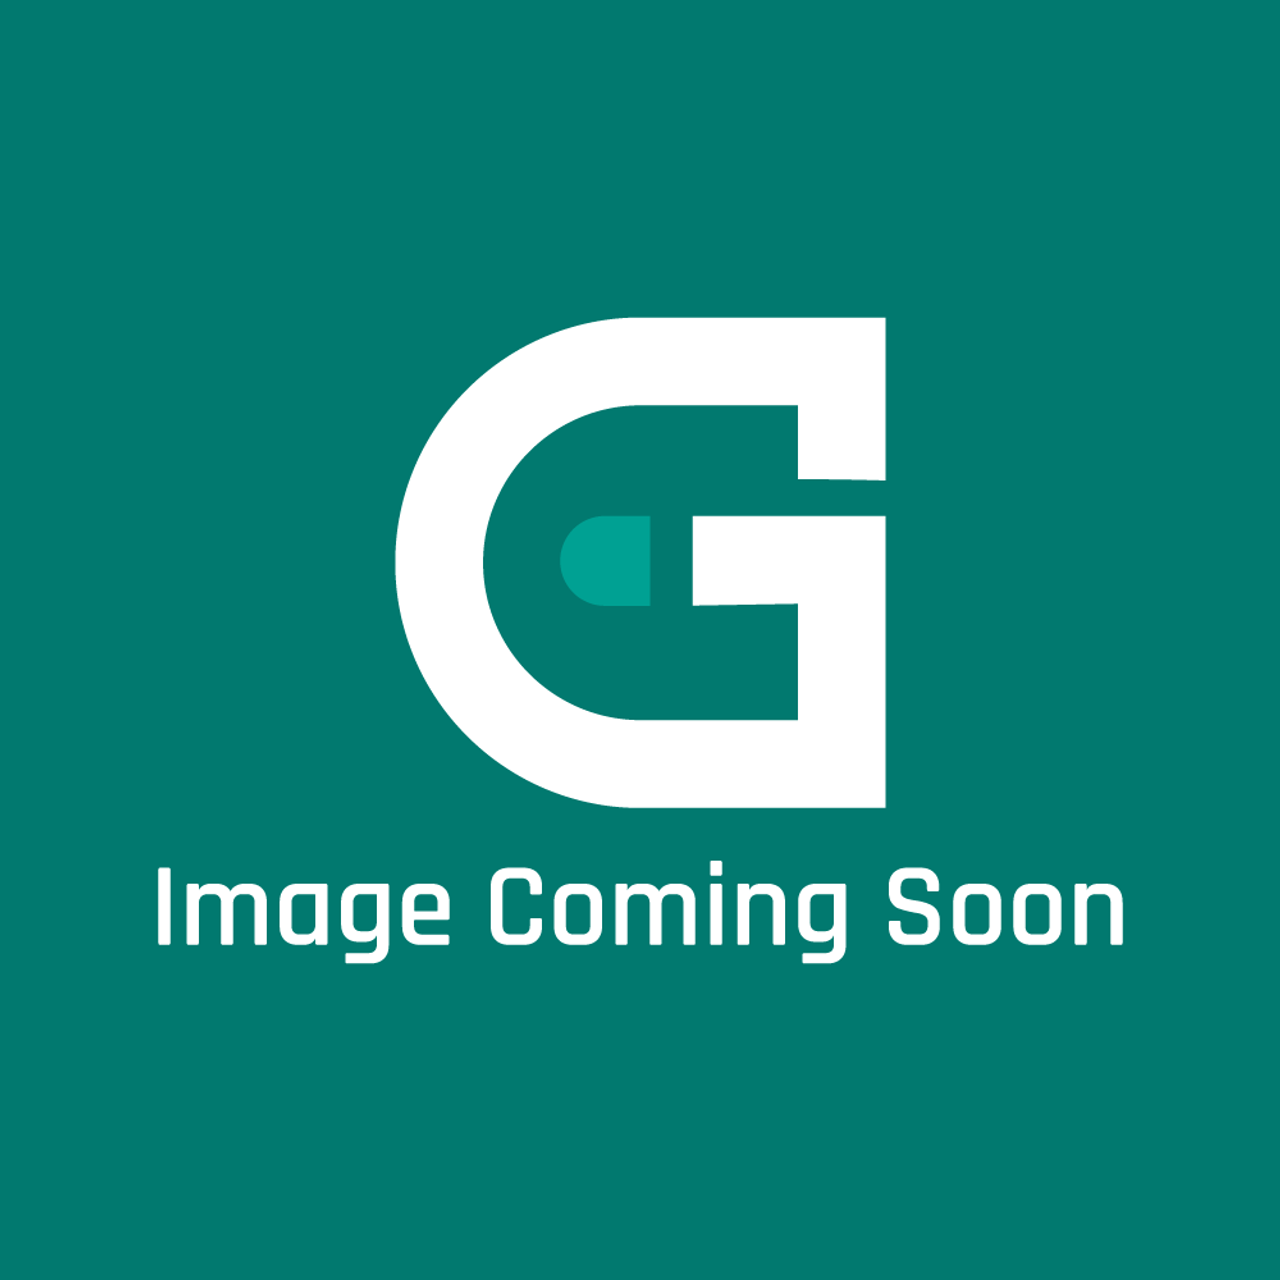 Garland 38602063 - Rj-45 Connecting Cable 1 M Blue - Image Coming Soon!